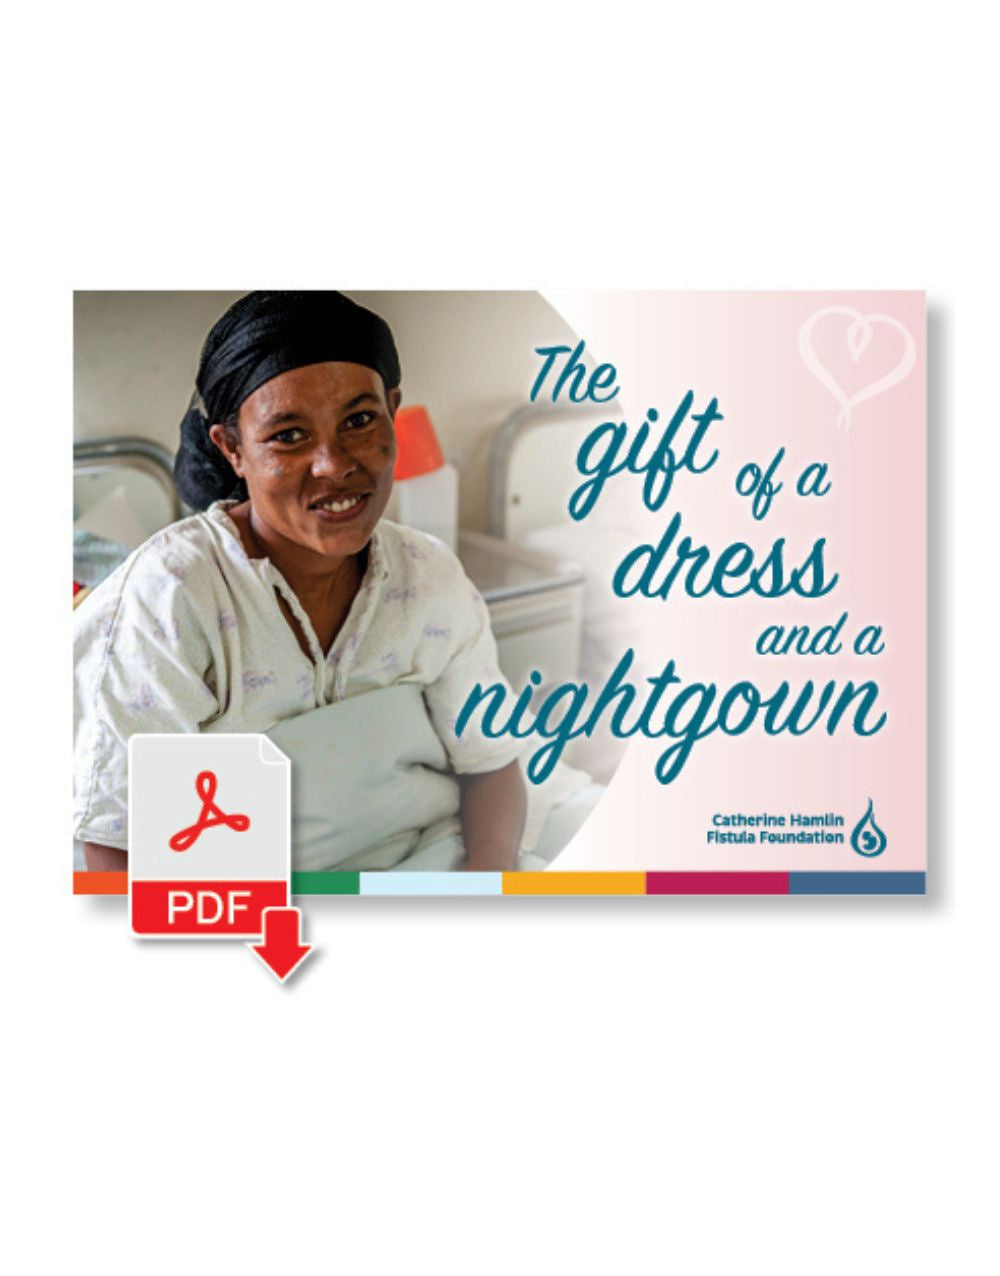 Dress & Nightgown - Printable Card